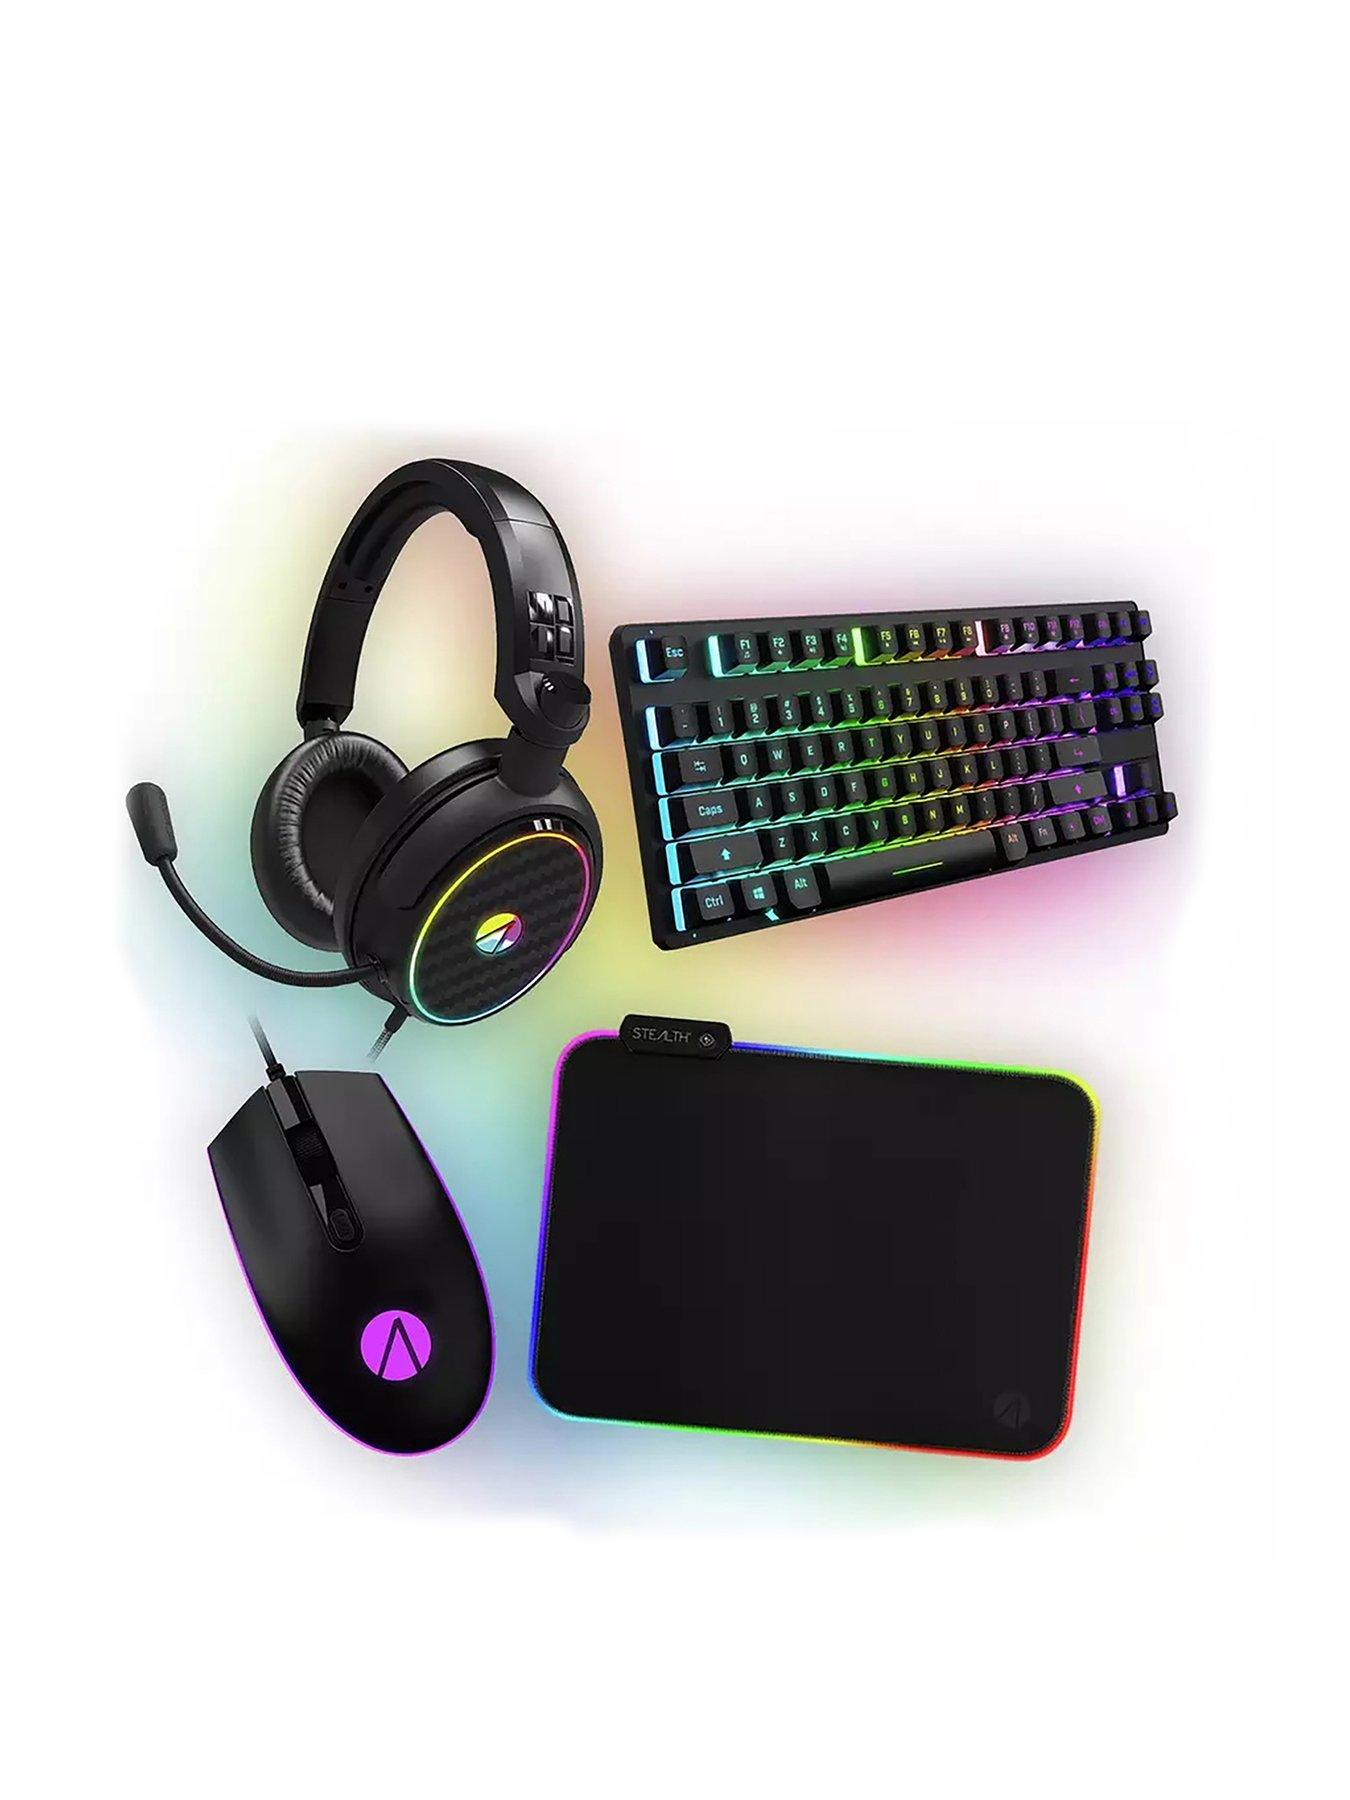 Bundle Mouse, Keyboard, - Pad, LED Stealth Mouse Up 4-in-1 Gaming Gaming Light Headset C6-100